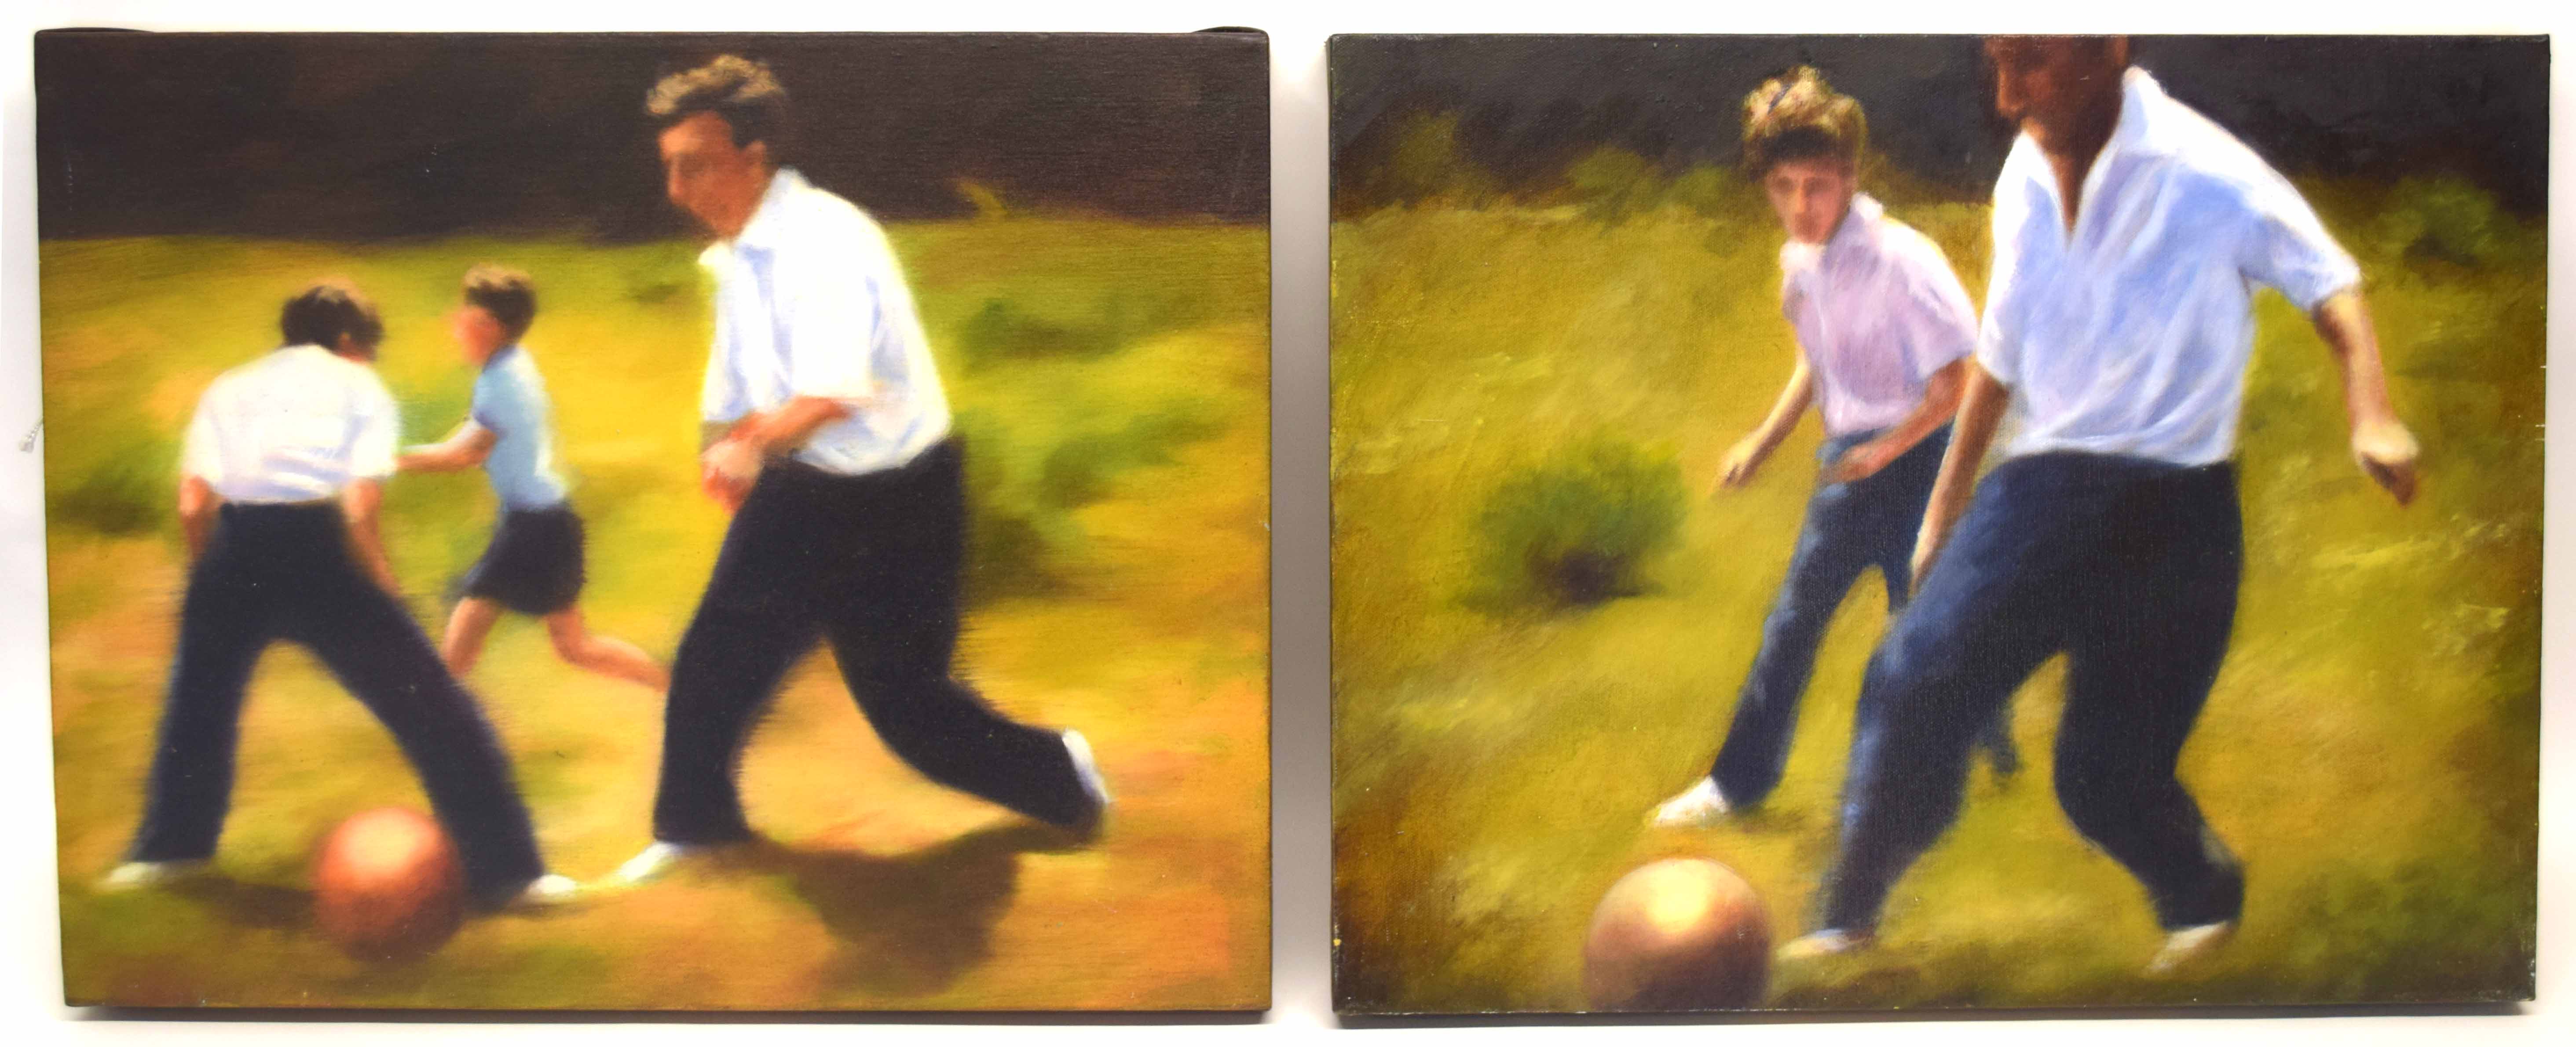 Two paintings by Luke Morgan 2004, entitled "The Big Match"